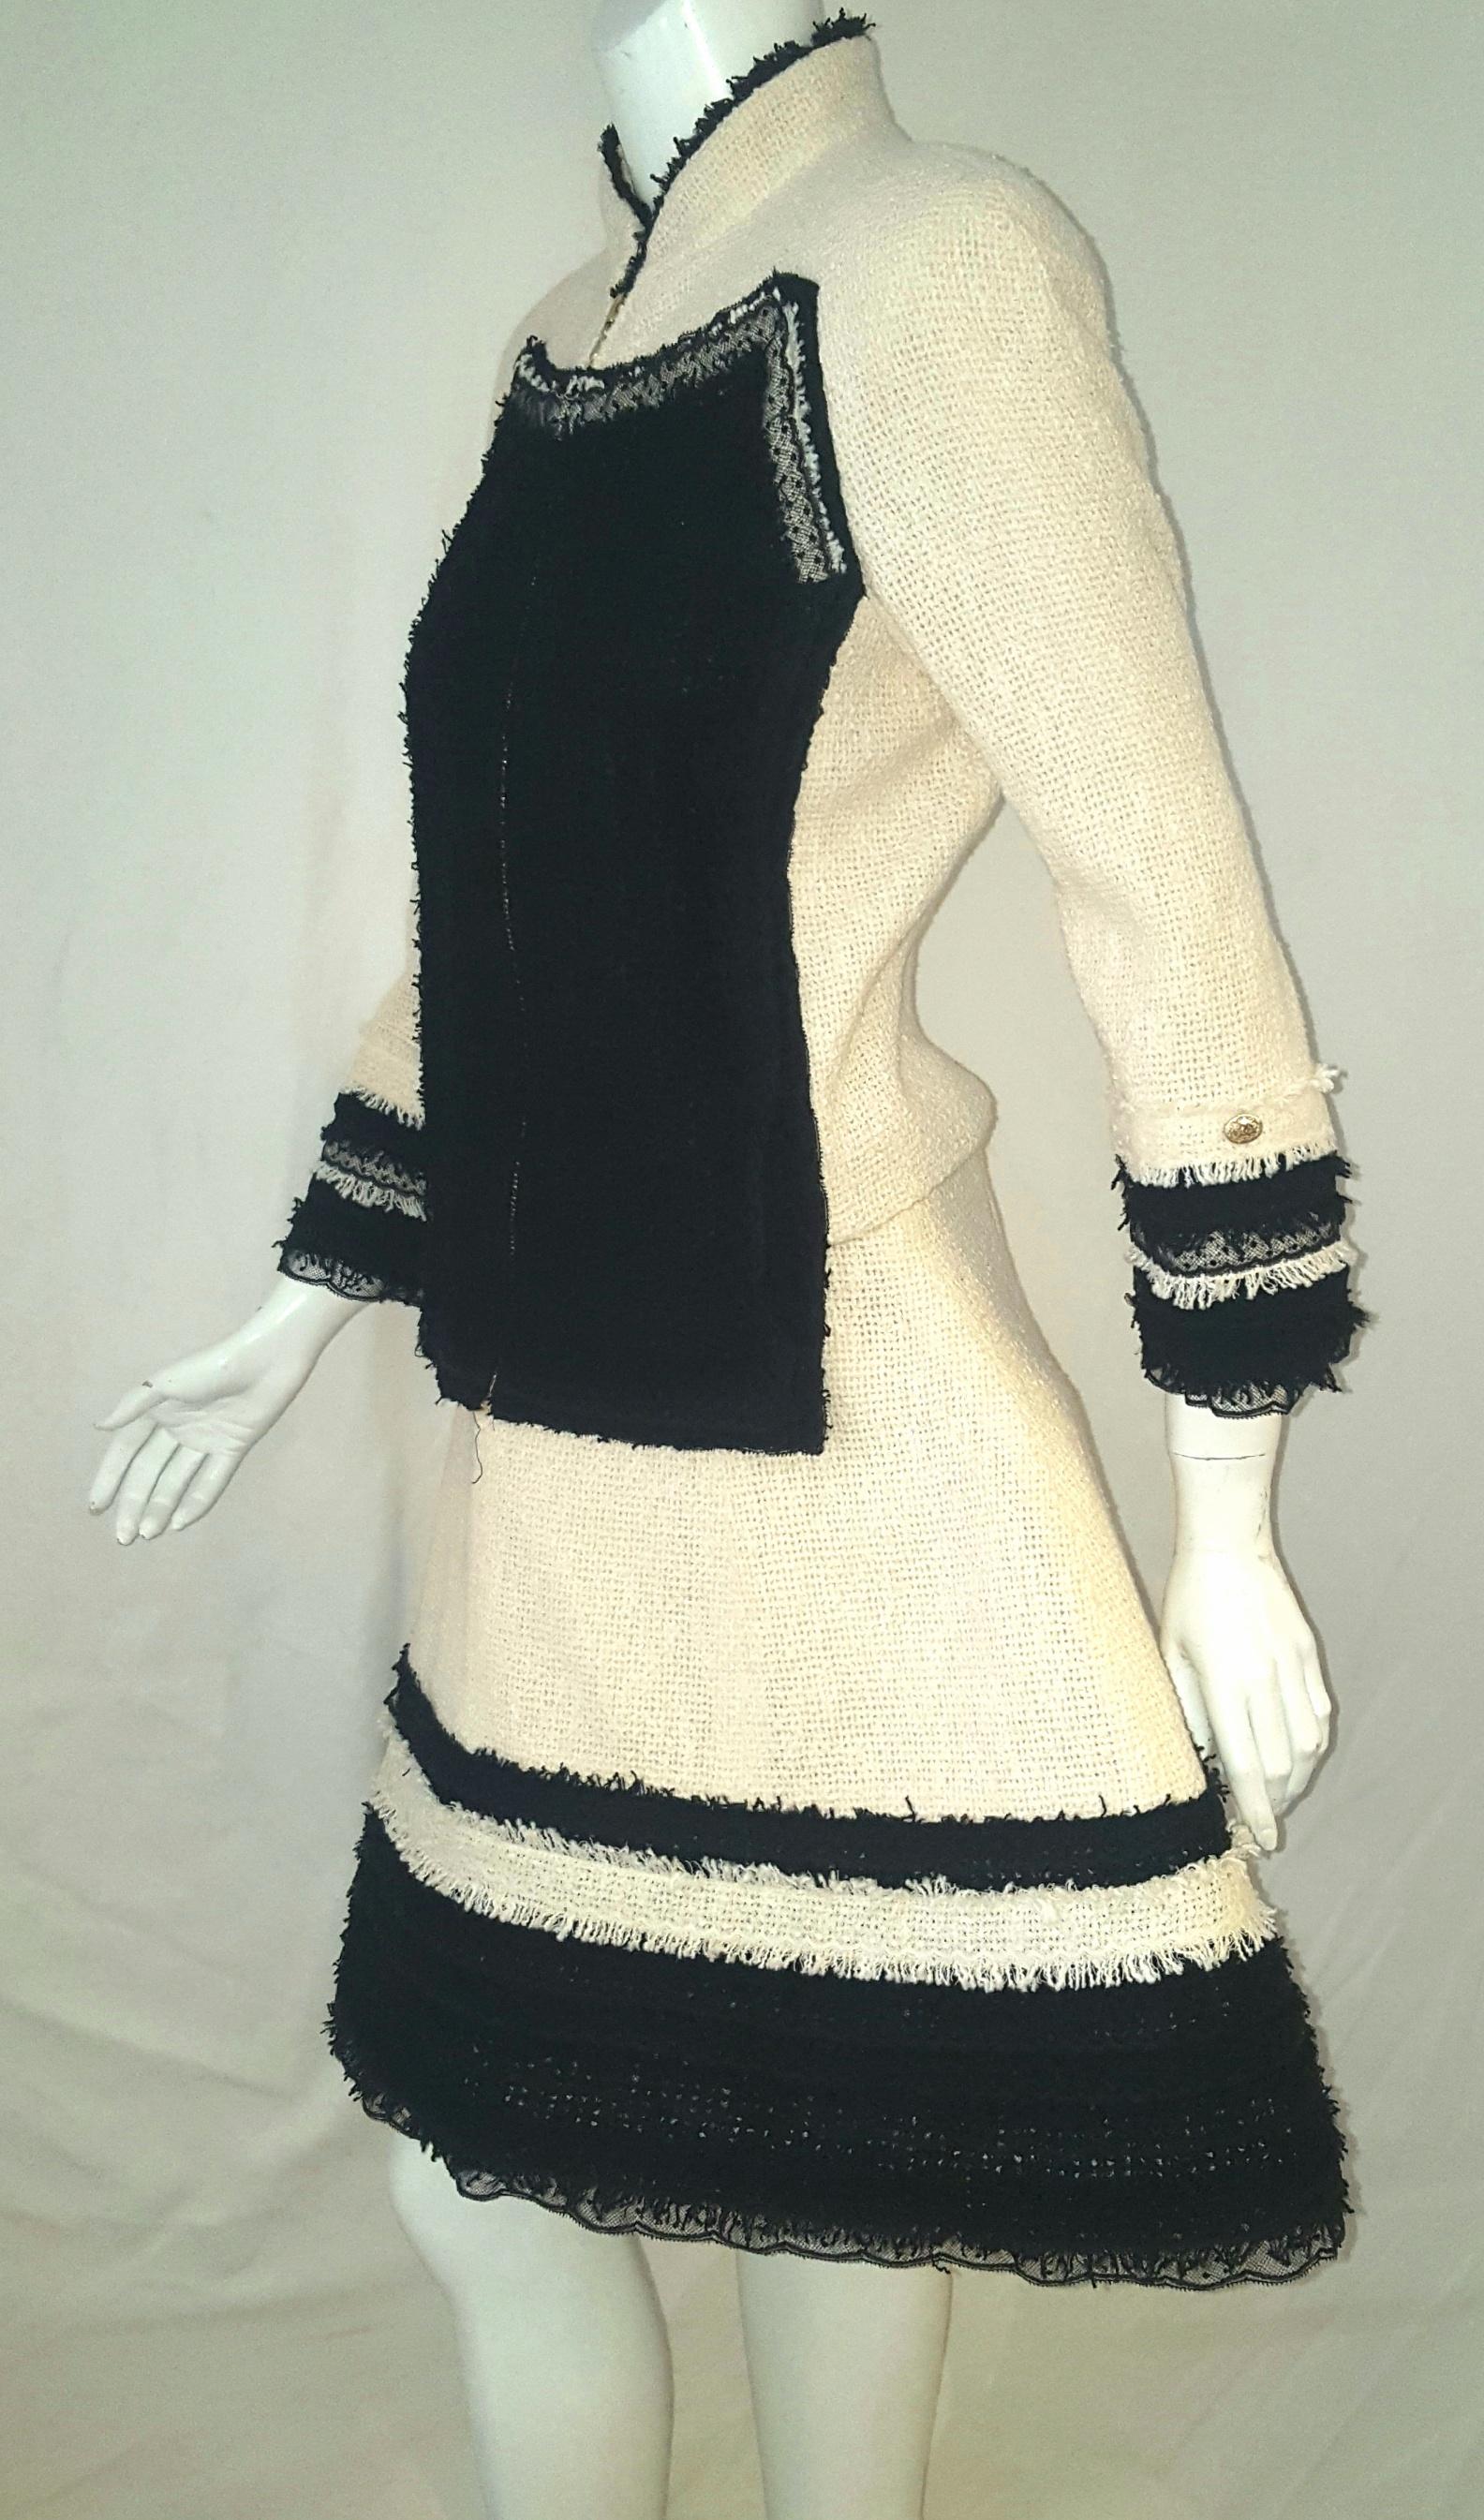 Chanel ivory and black trim fringe and ruffled lace on both the jacket and skirt.  This fabulous jacket features a tailored fitted silhouette with an up collar w/ black fringe & zipper closure. 2 front plaquettes in black boucle fabric framed in